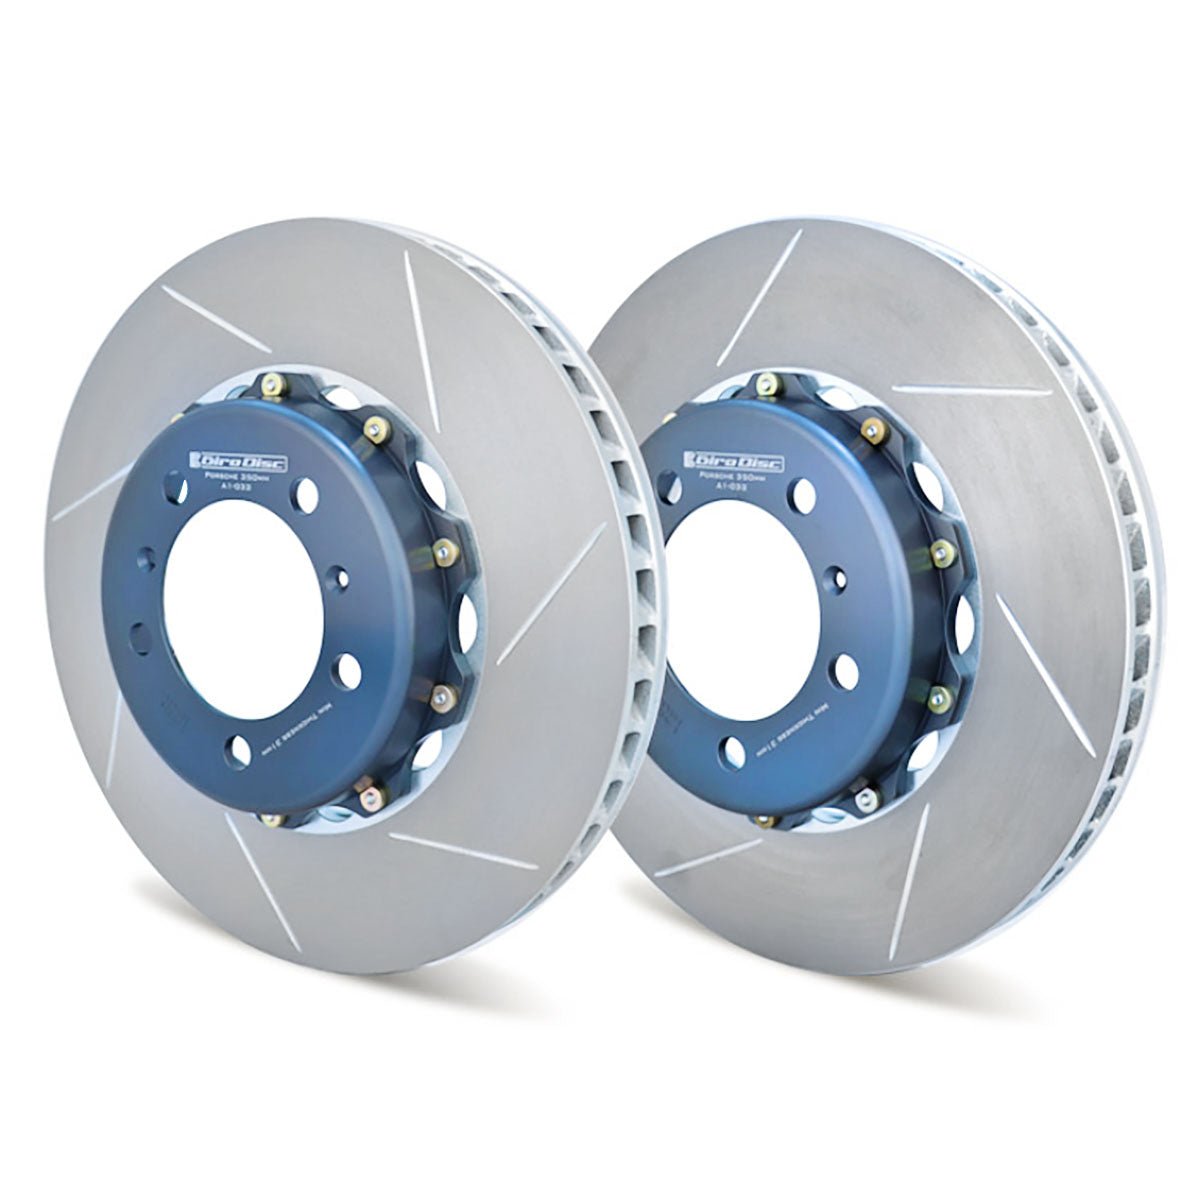 A1-032 Girodisc 2pc Front Brake Rotors (350mm) - Competition Motorsport